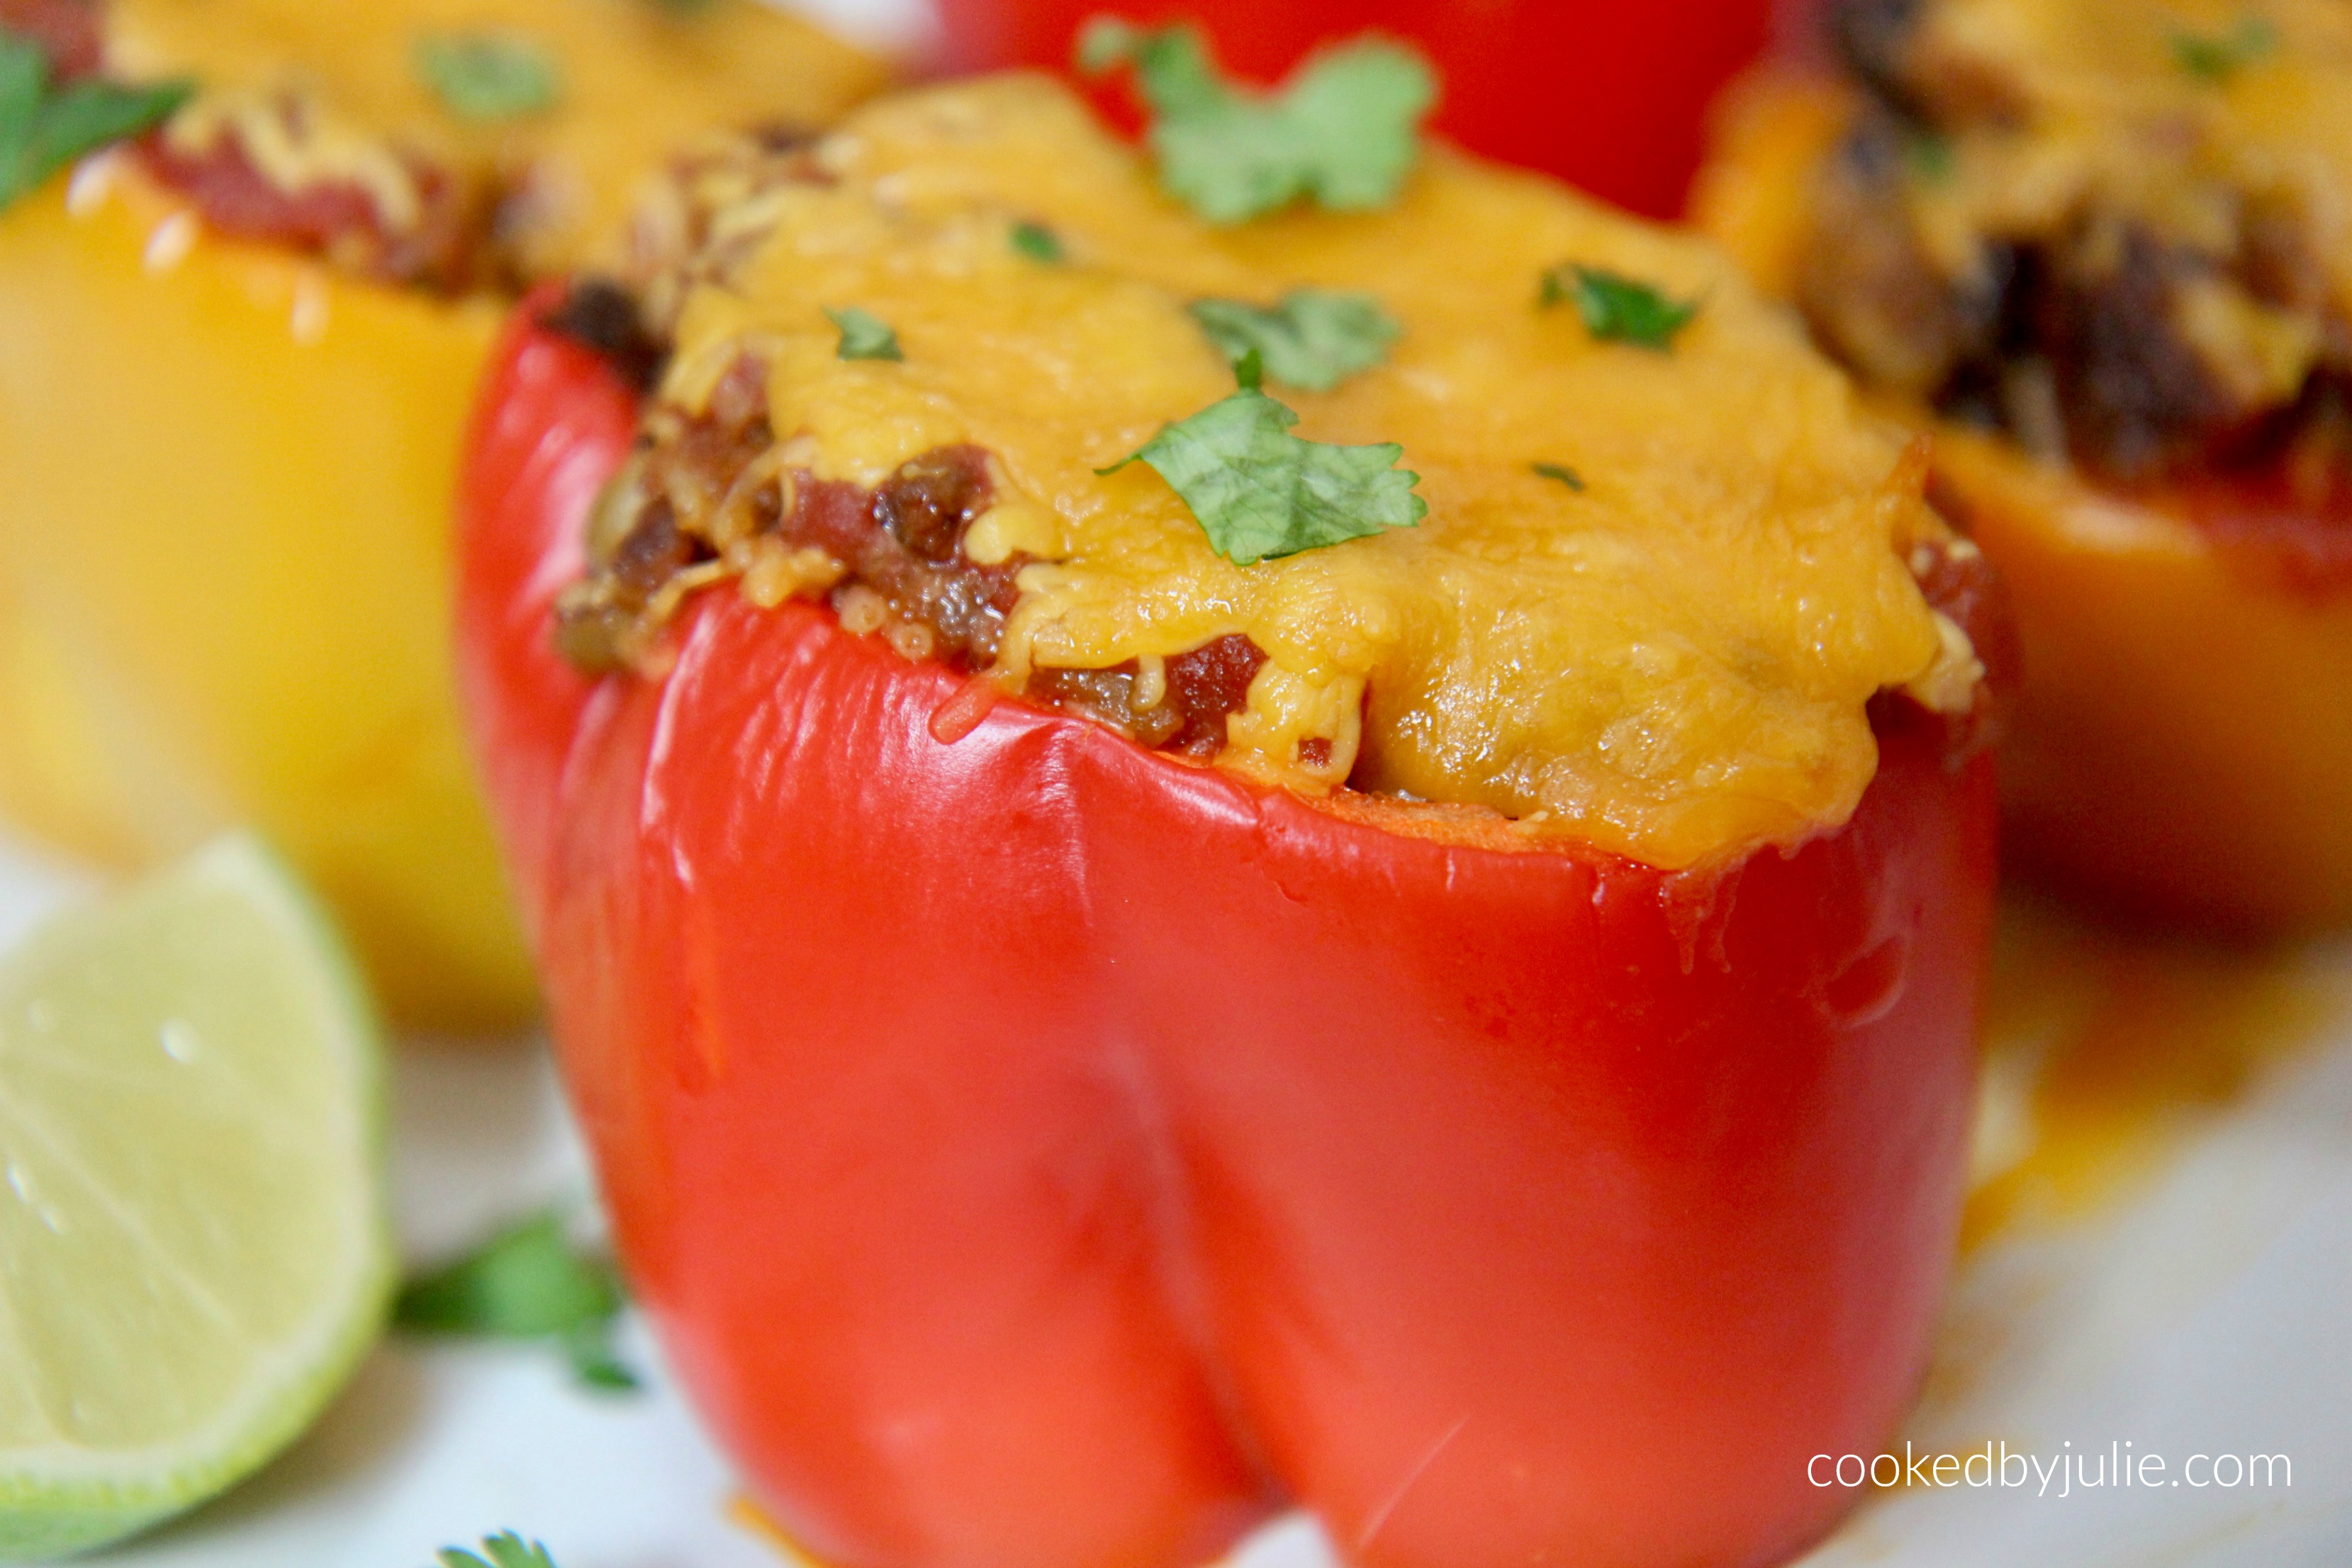 Make this stuffed peppers recipe a little healthier with brown rice instead of white